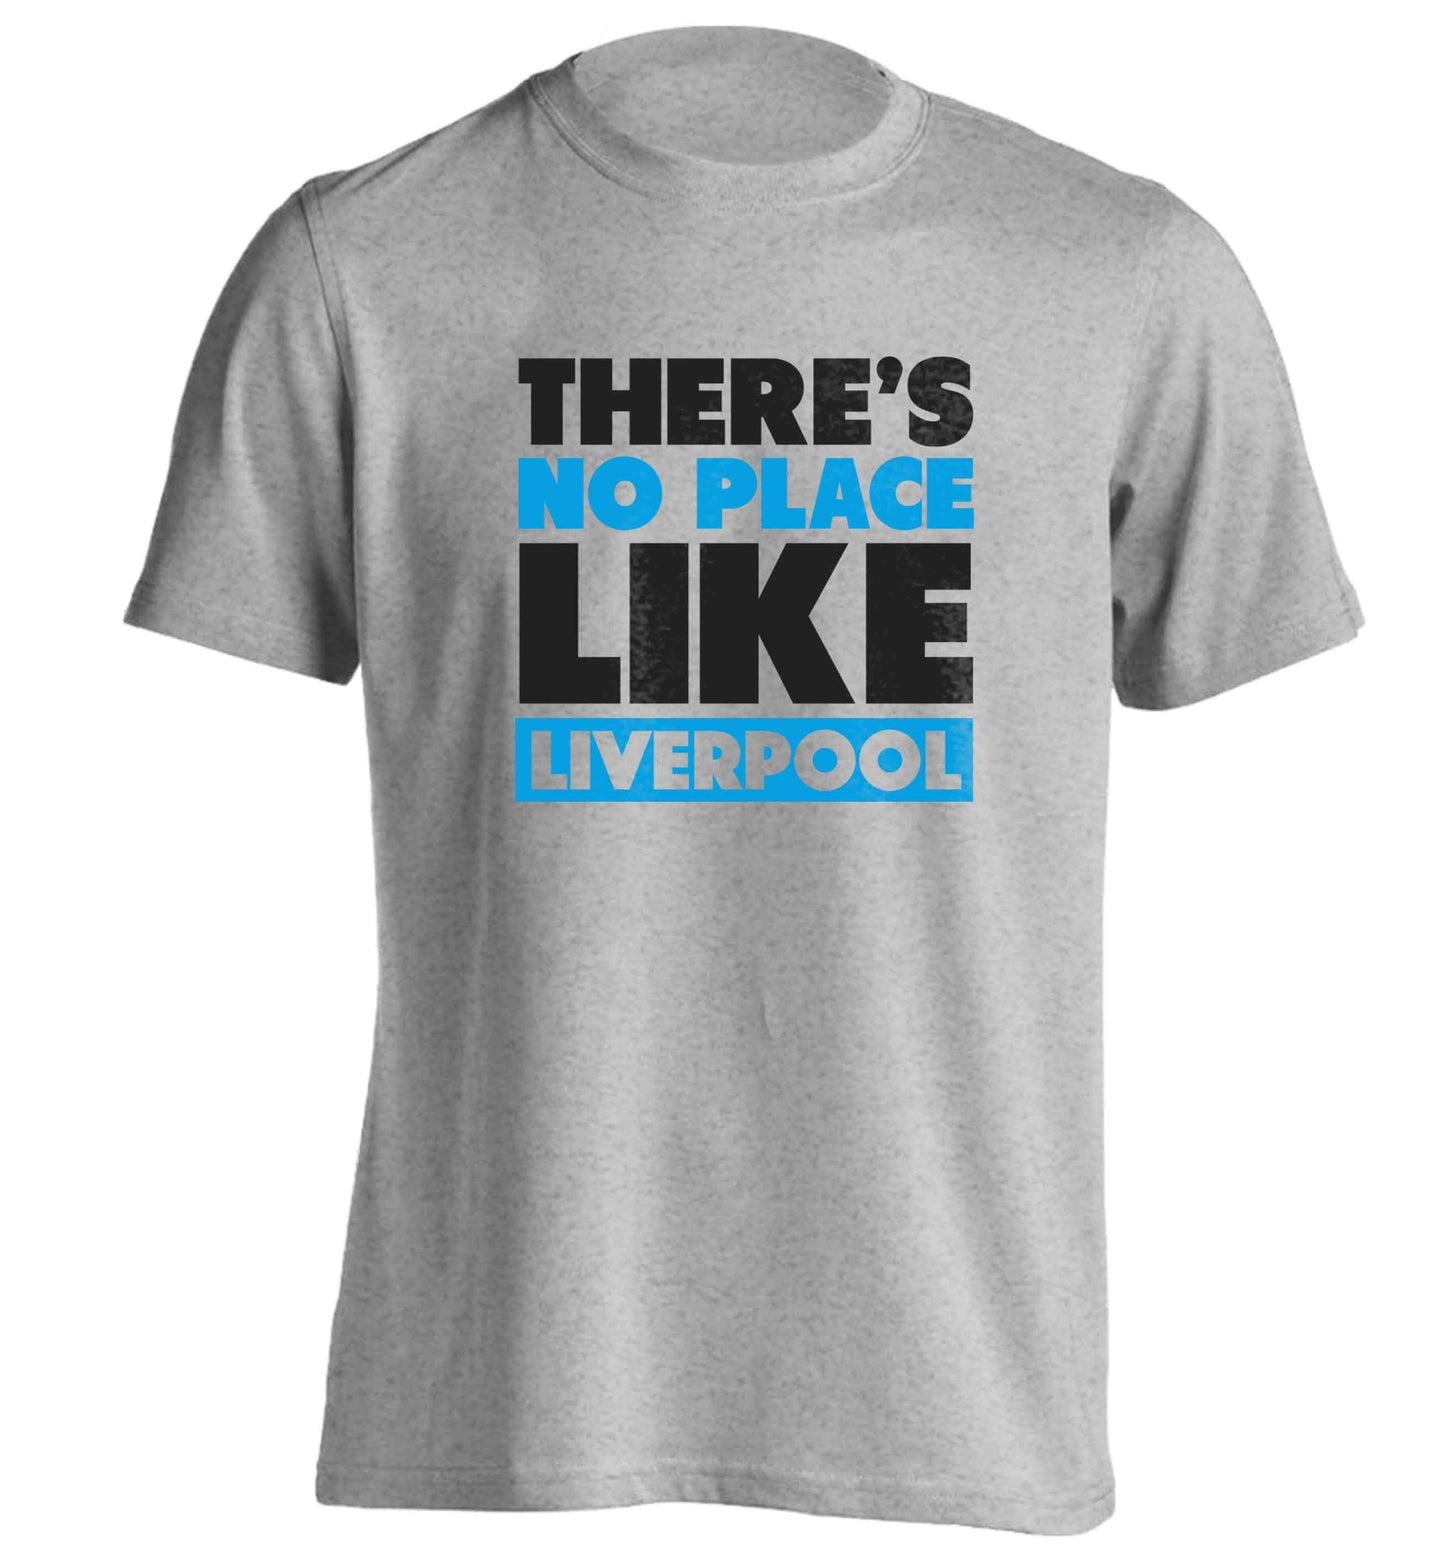 There's no place like Liverpool adults unisex grey Tshirt 2XL